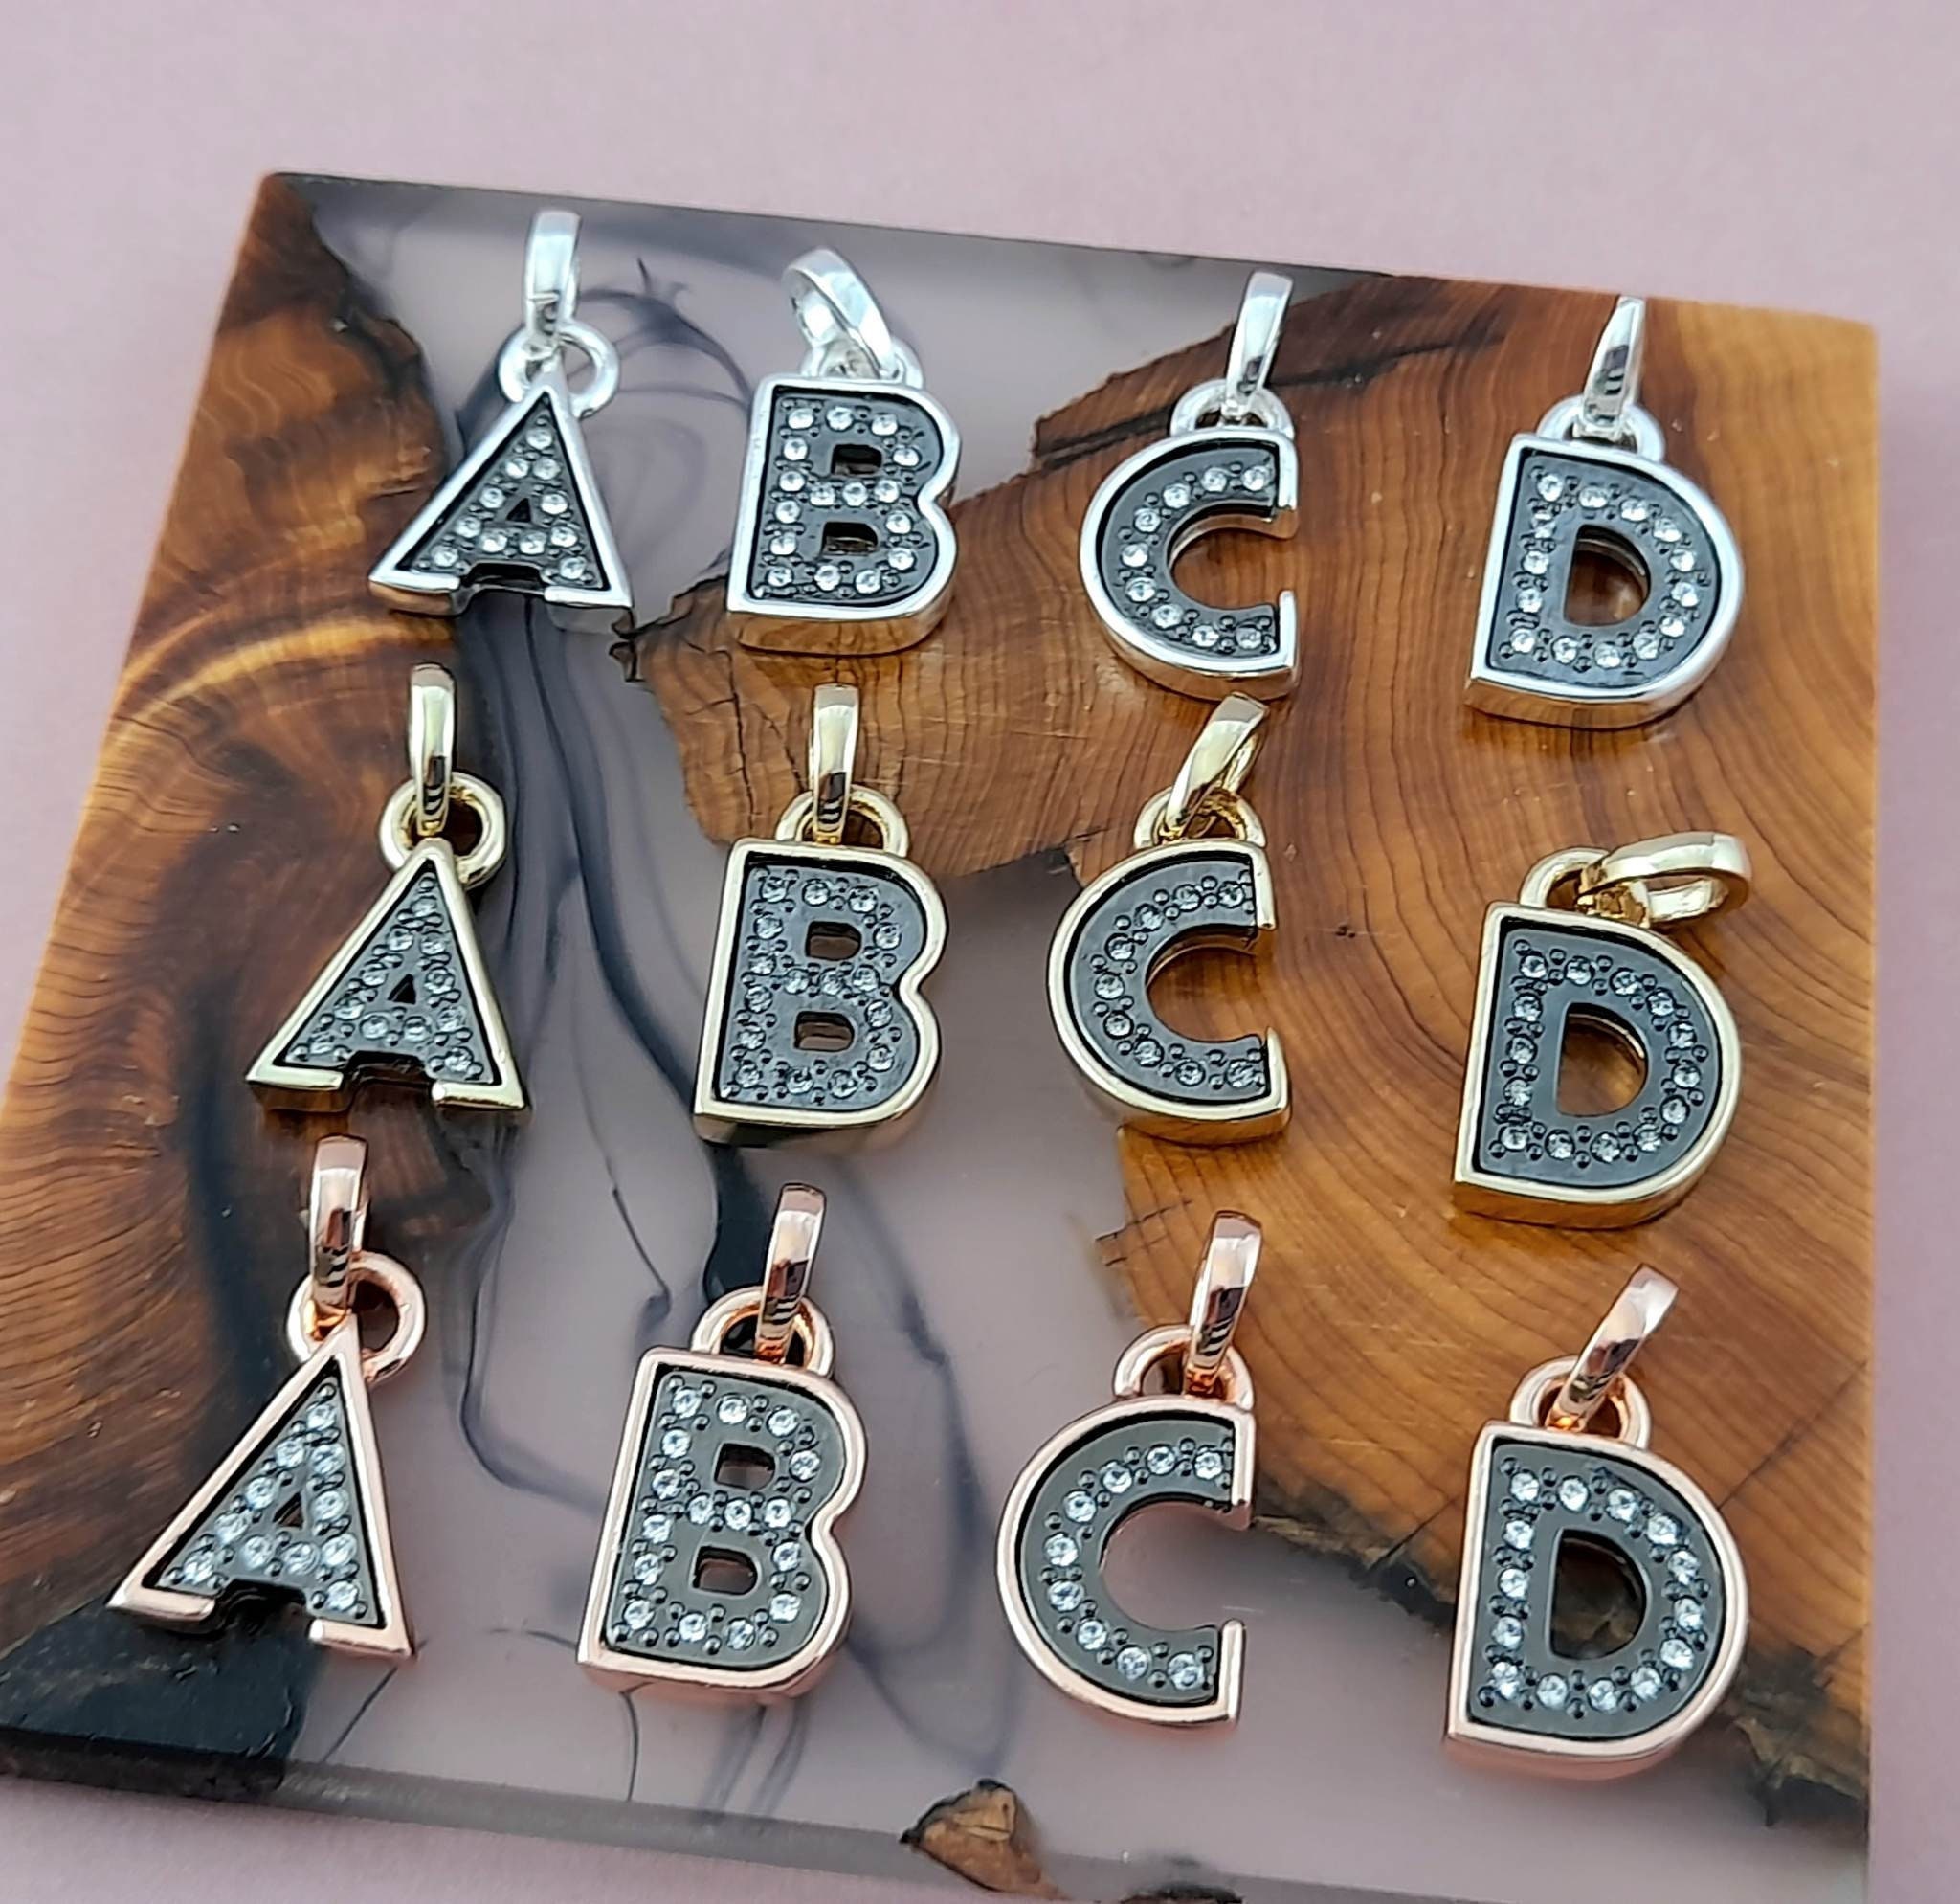 Self Adhesive Diamante Alphabet Stickers Peel off Diamante Letters 5cm  Sparkly Letters Wedding Embellishment Large Letter Stickers 